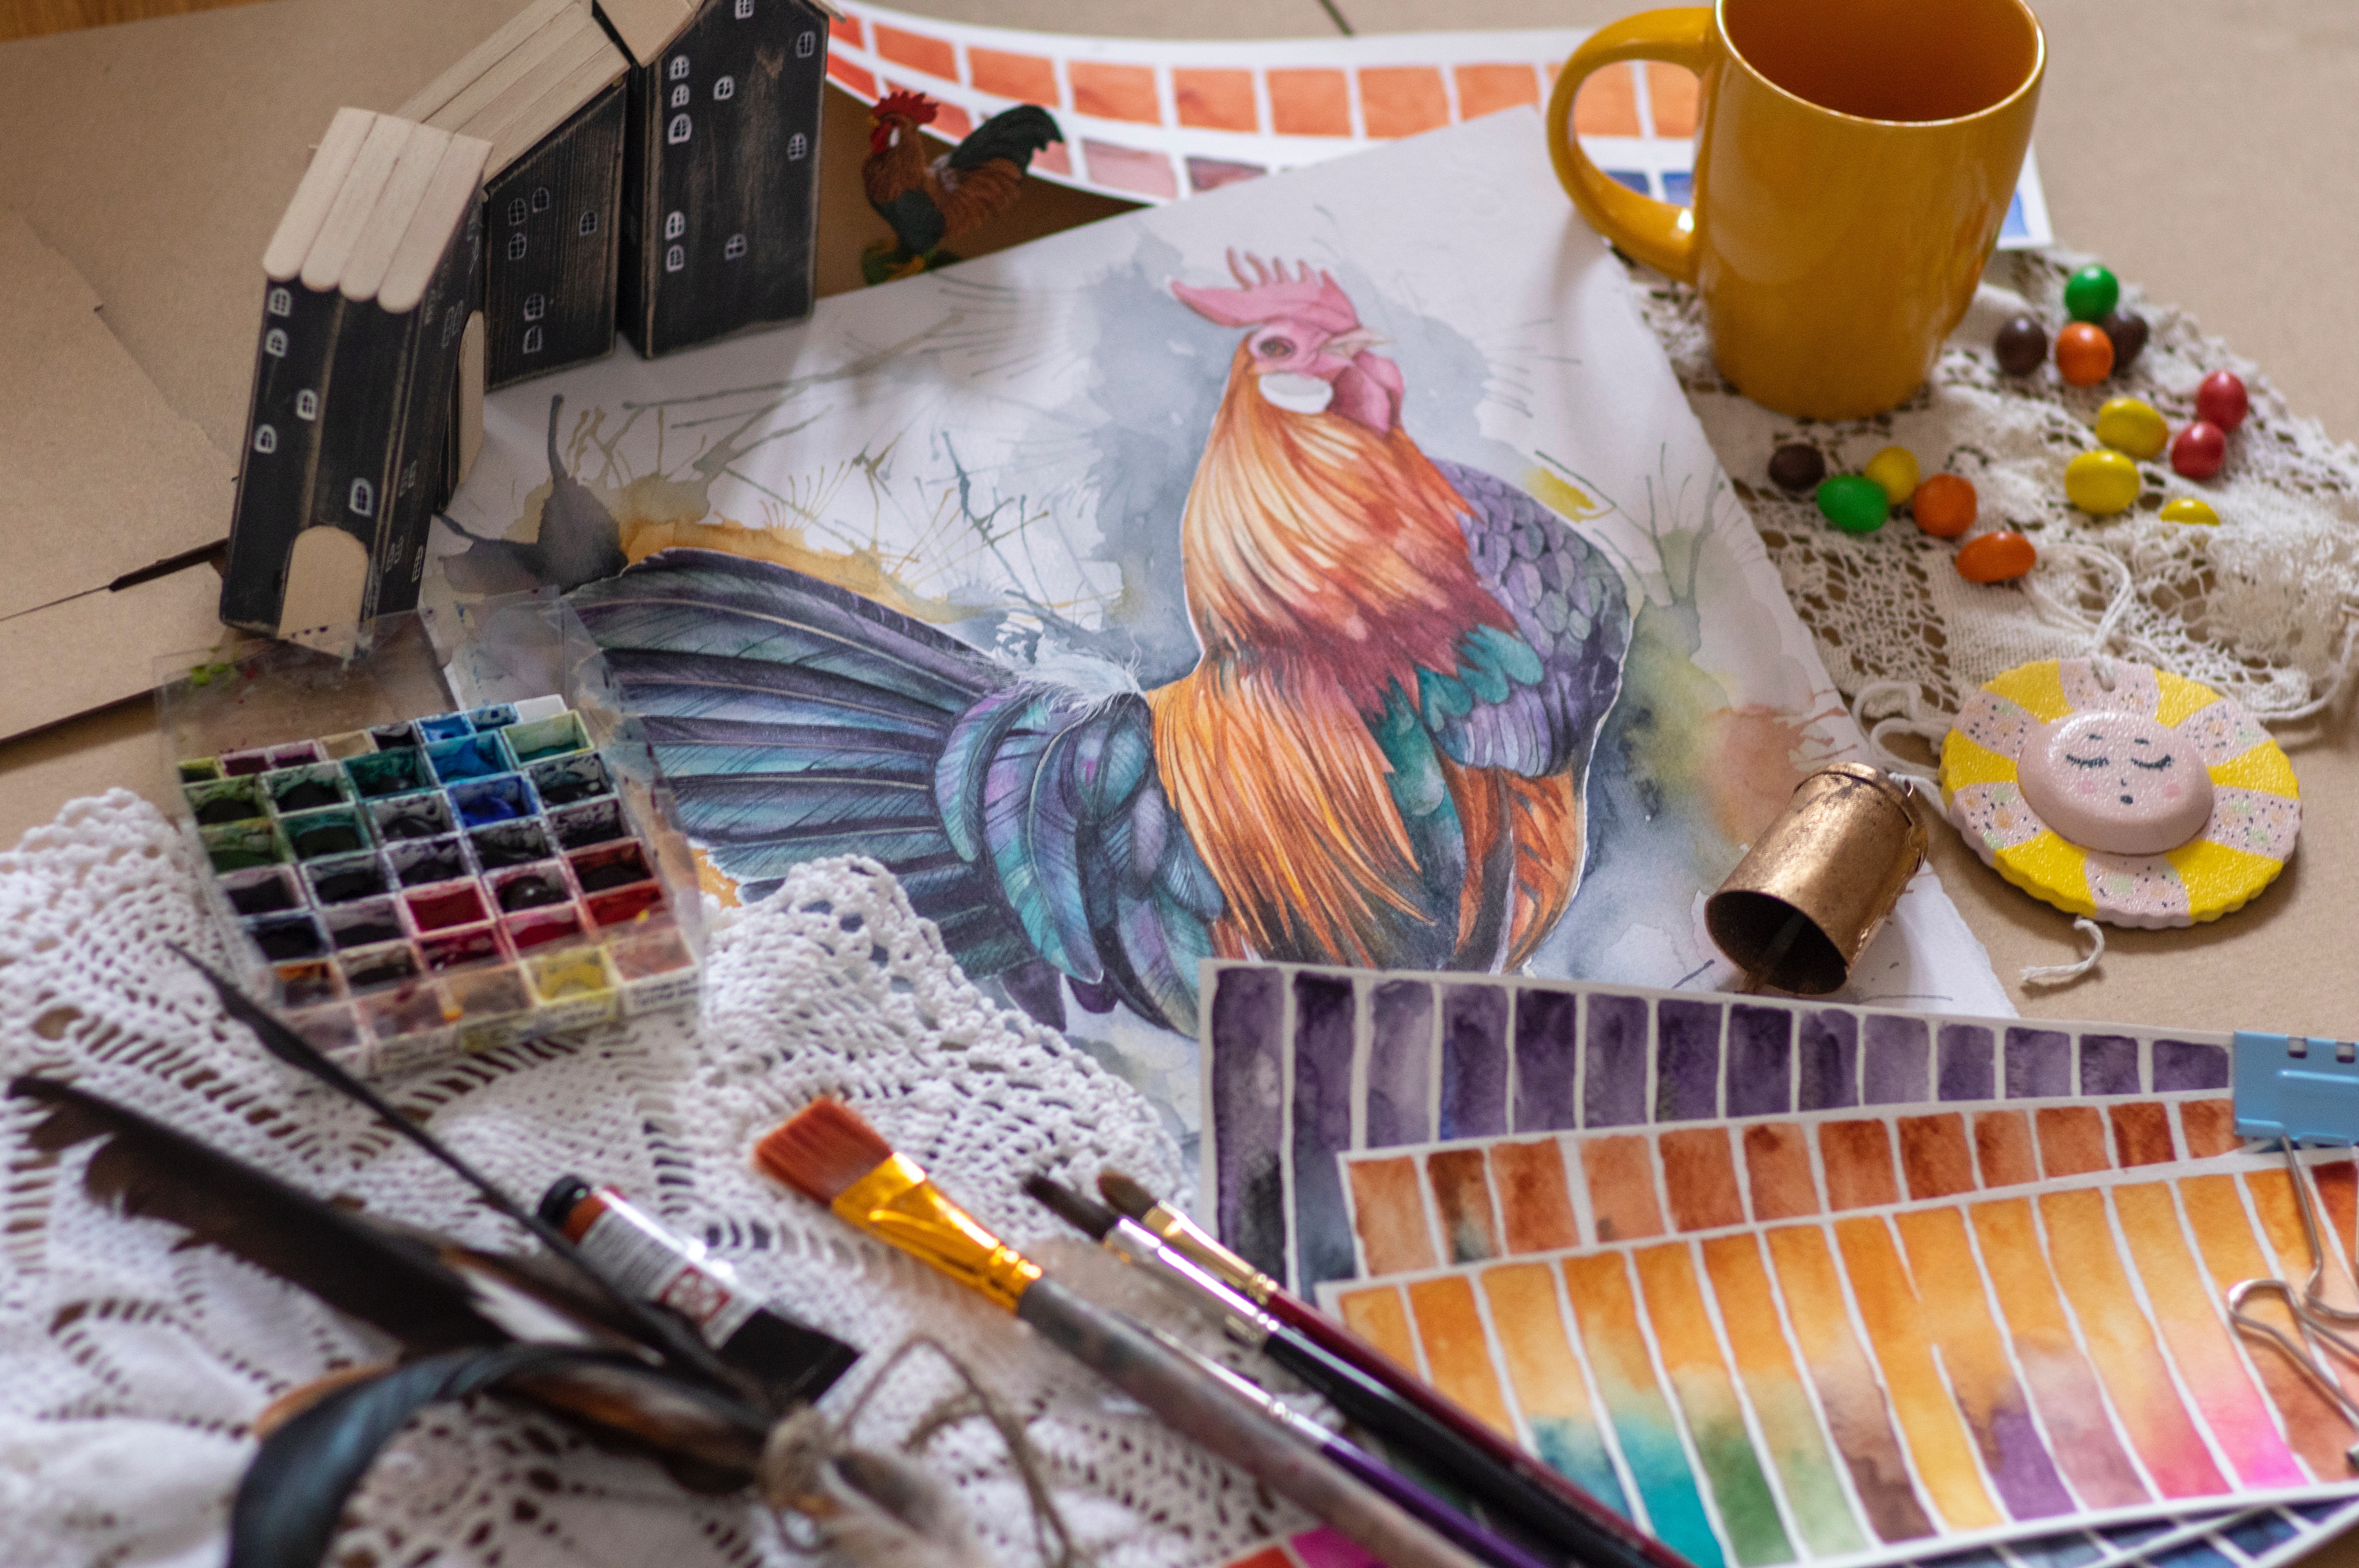 5 Creative Hobbies to Do at Home